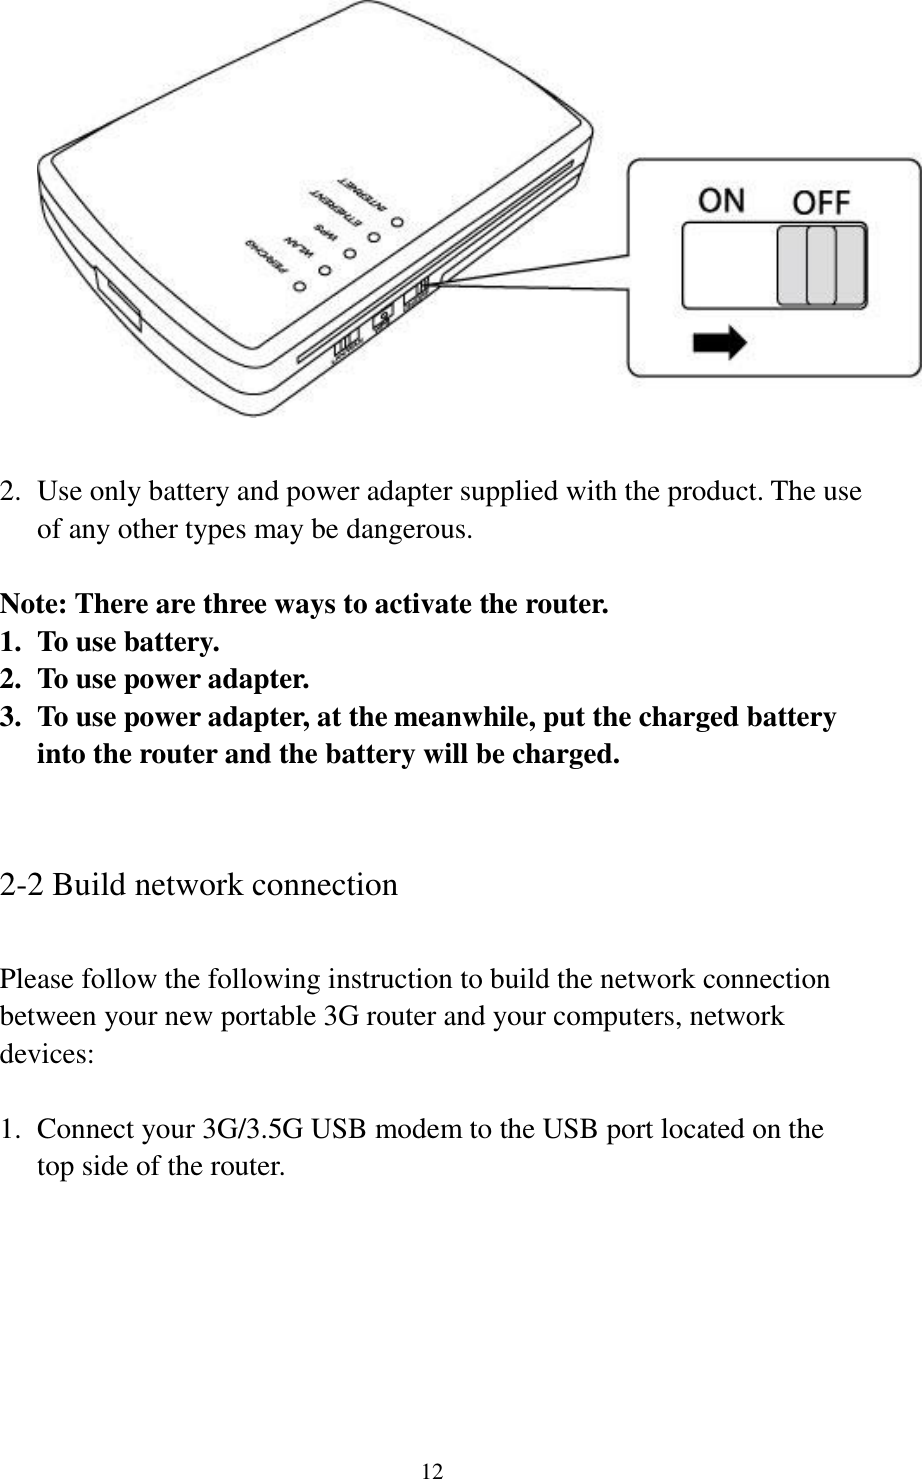 12   2. Use only battery and power adapter supplied with the product. The use of any other types may be dangerous.  Note: There are three ways to activate the router. 1. To use battery. 2. To use power adapter. 3. To use power adapter, at the meanwhile, put the charged battery into the router and the battery will be charged.   2-2 Build network connection  Please follow the following instruction to build the network connection between your new portable 3G router and your computers, network devices:  1. Connect your 3G/3.5G USB modem to the USB port located on the top side of the router.  